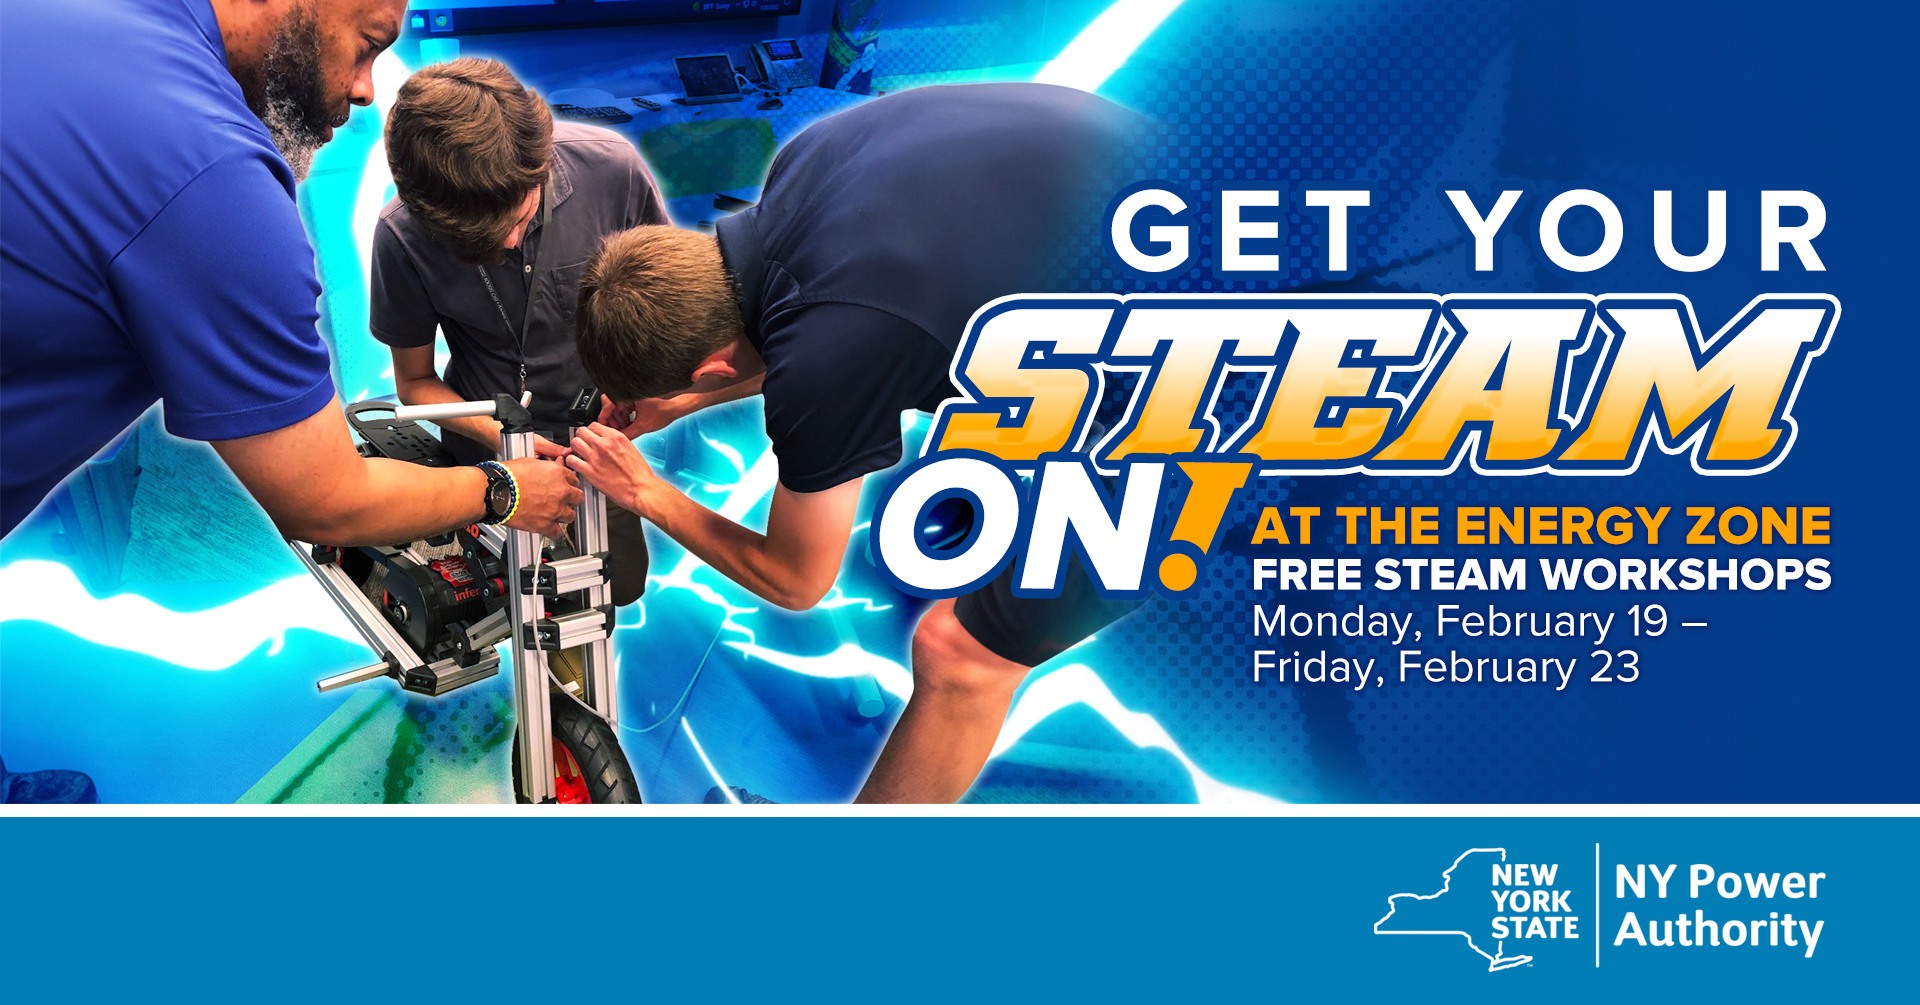 NY Power Authority on X: Get your STEAM on at the NY Energy Zone over  mid-winter break (M-F, Feb. 19-23), with free #STEM workshops, movies, arts  & crafts, and more! The NY